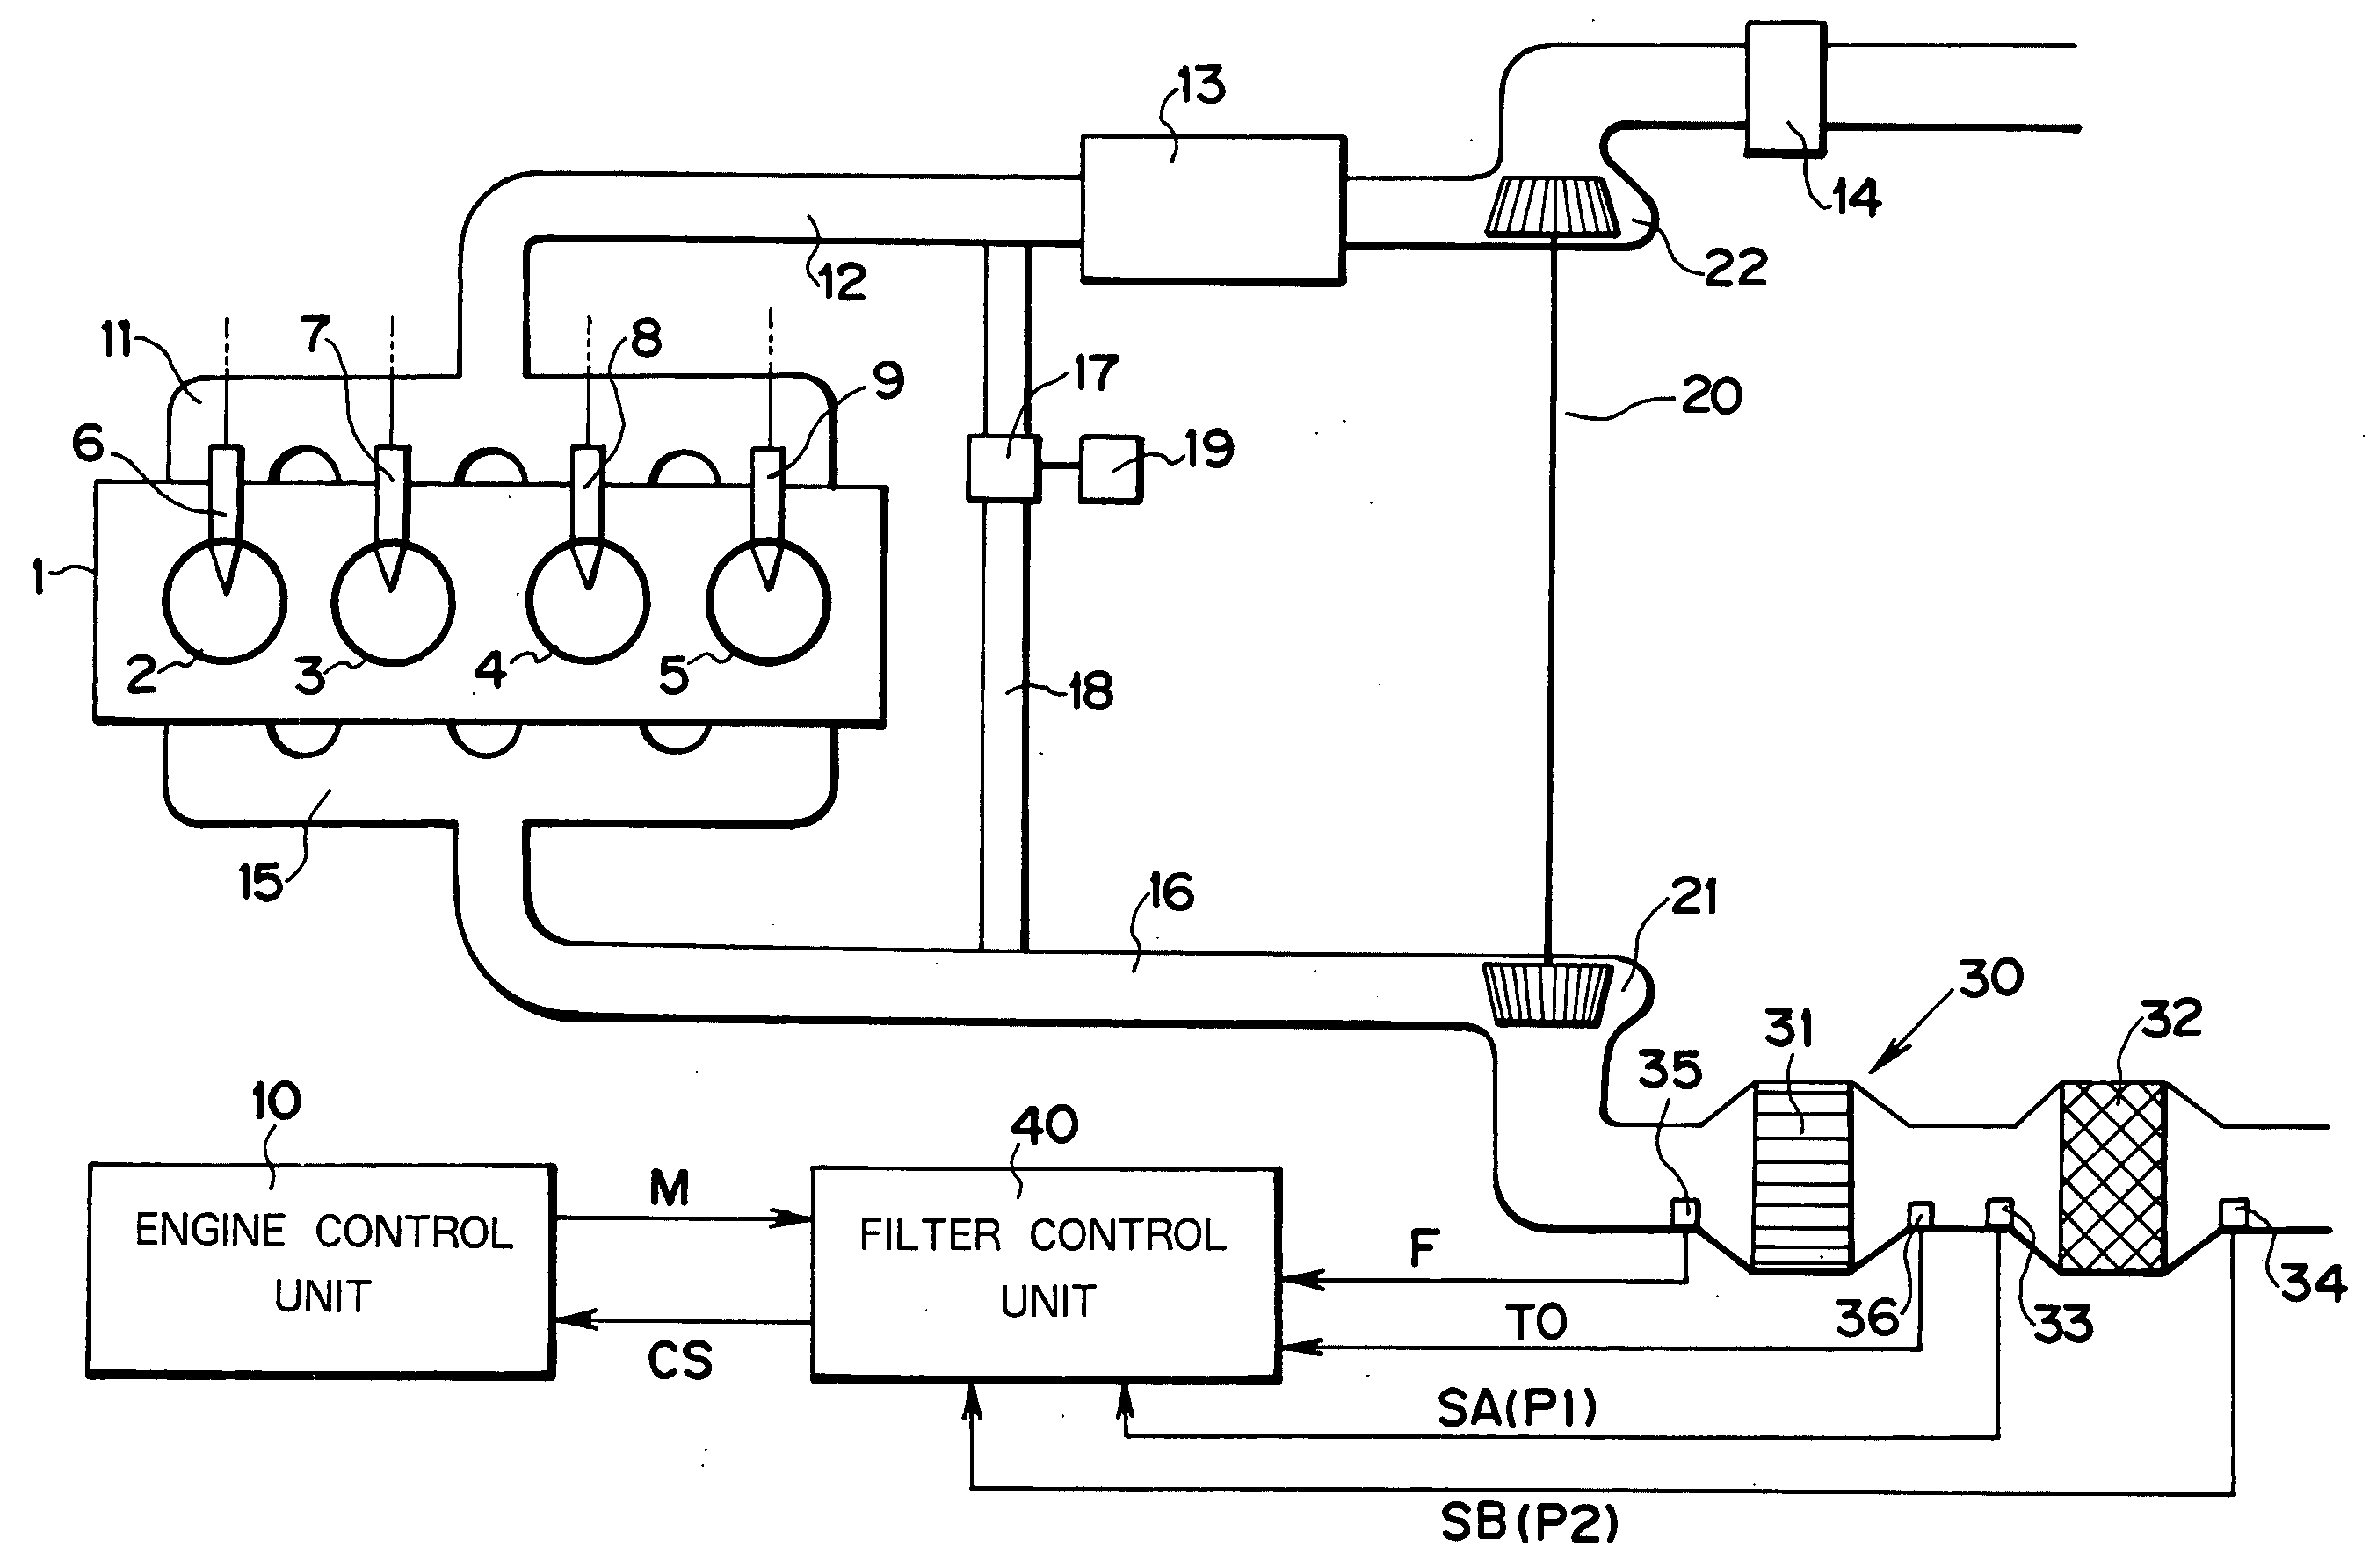 Filter control device